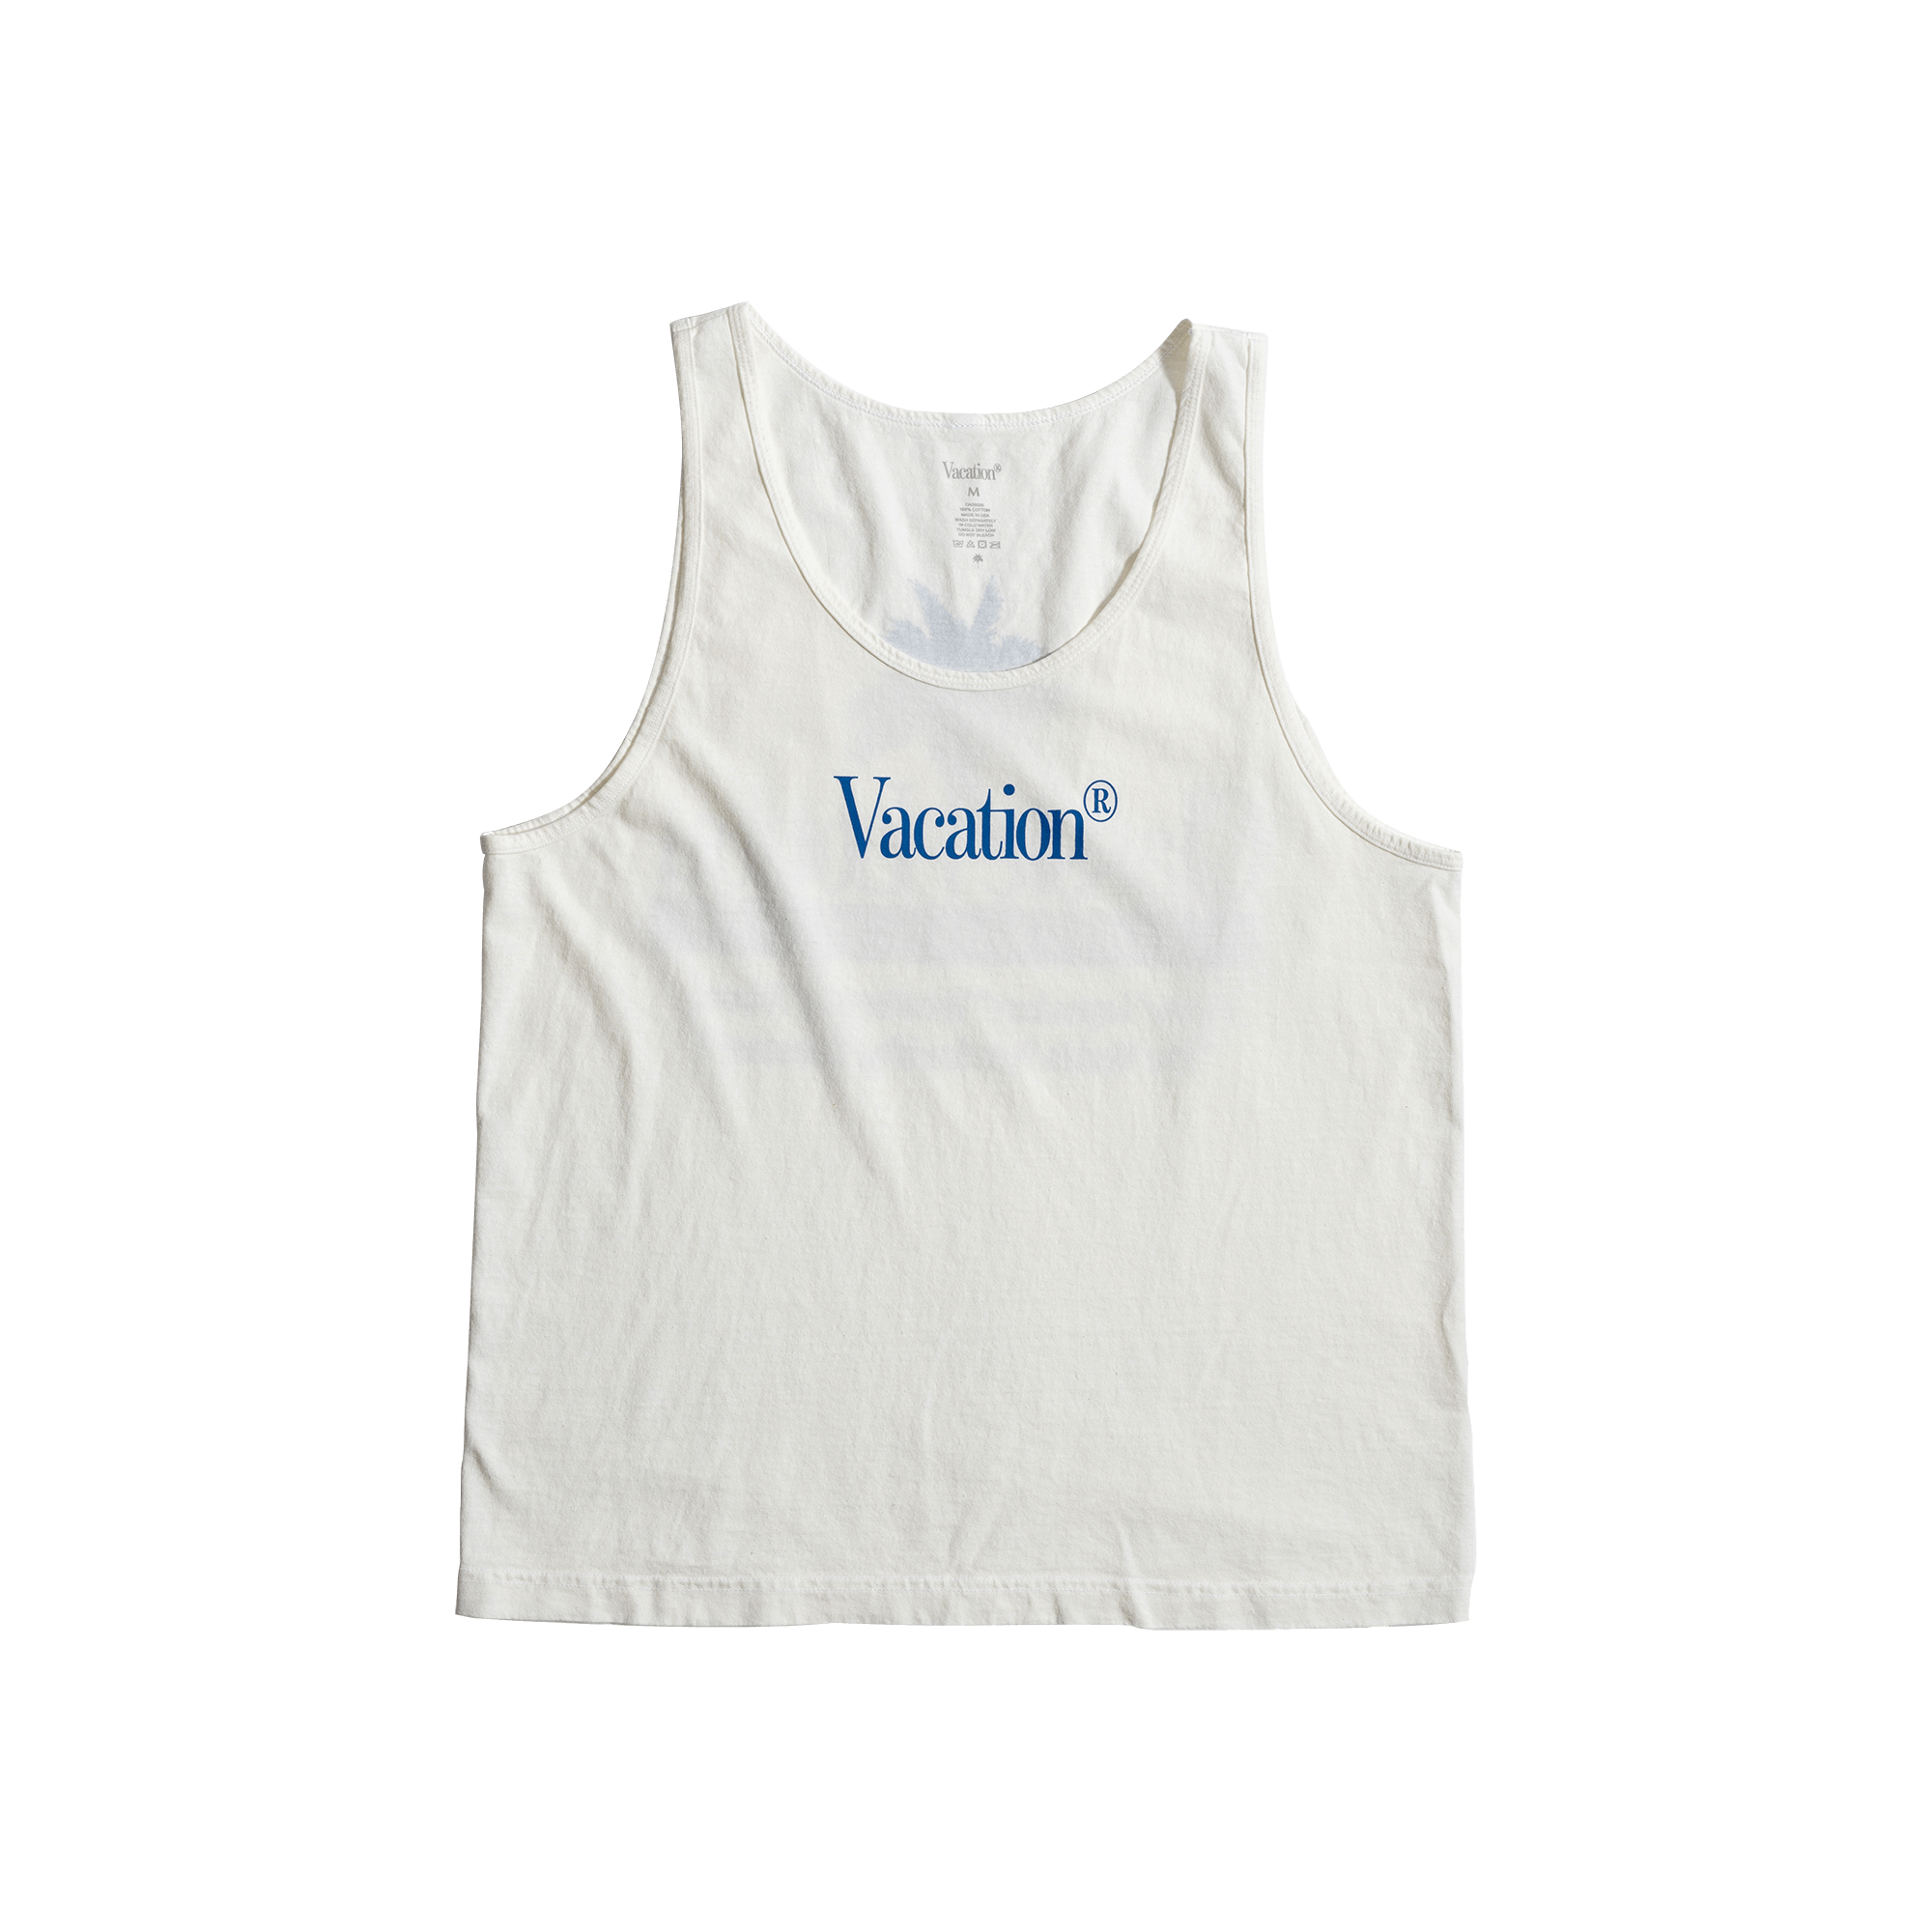 Vacation® White Sleeveless Shirt | The Worlds Best-Smelling Sunscreen ...